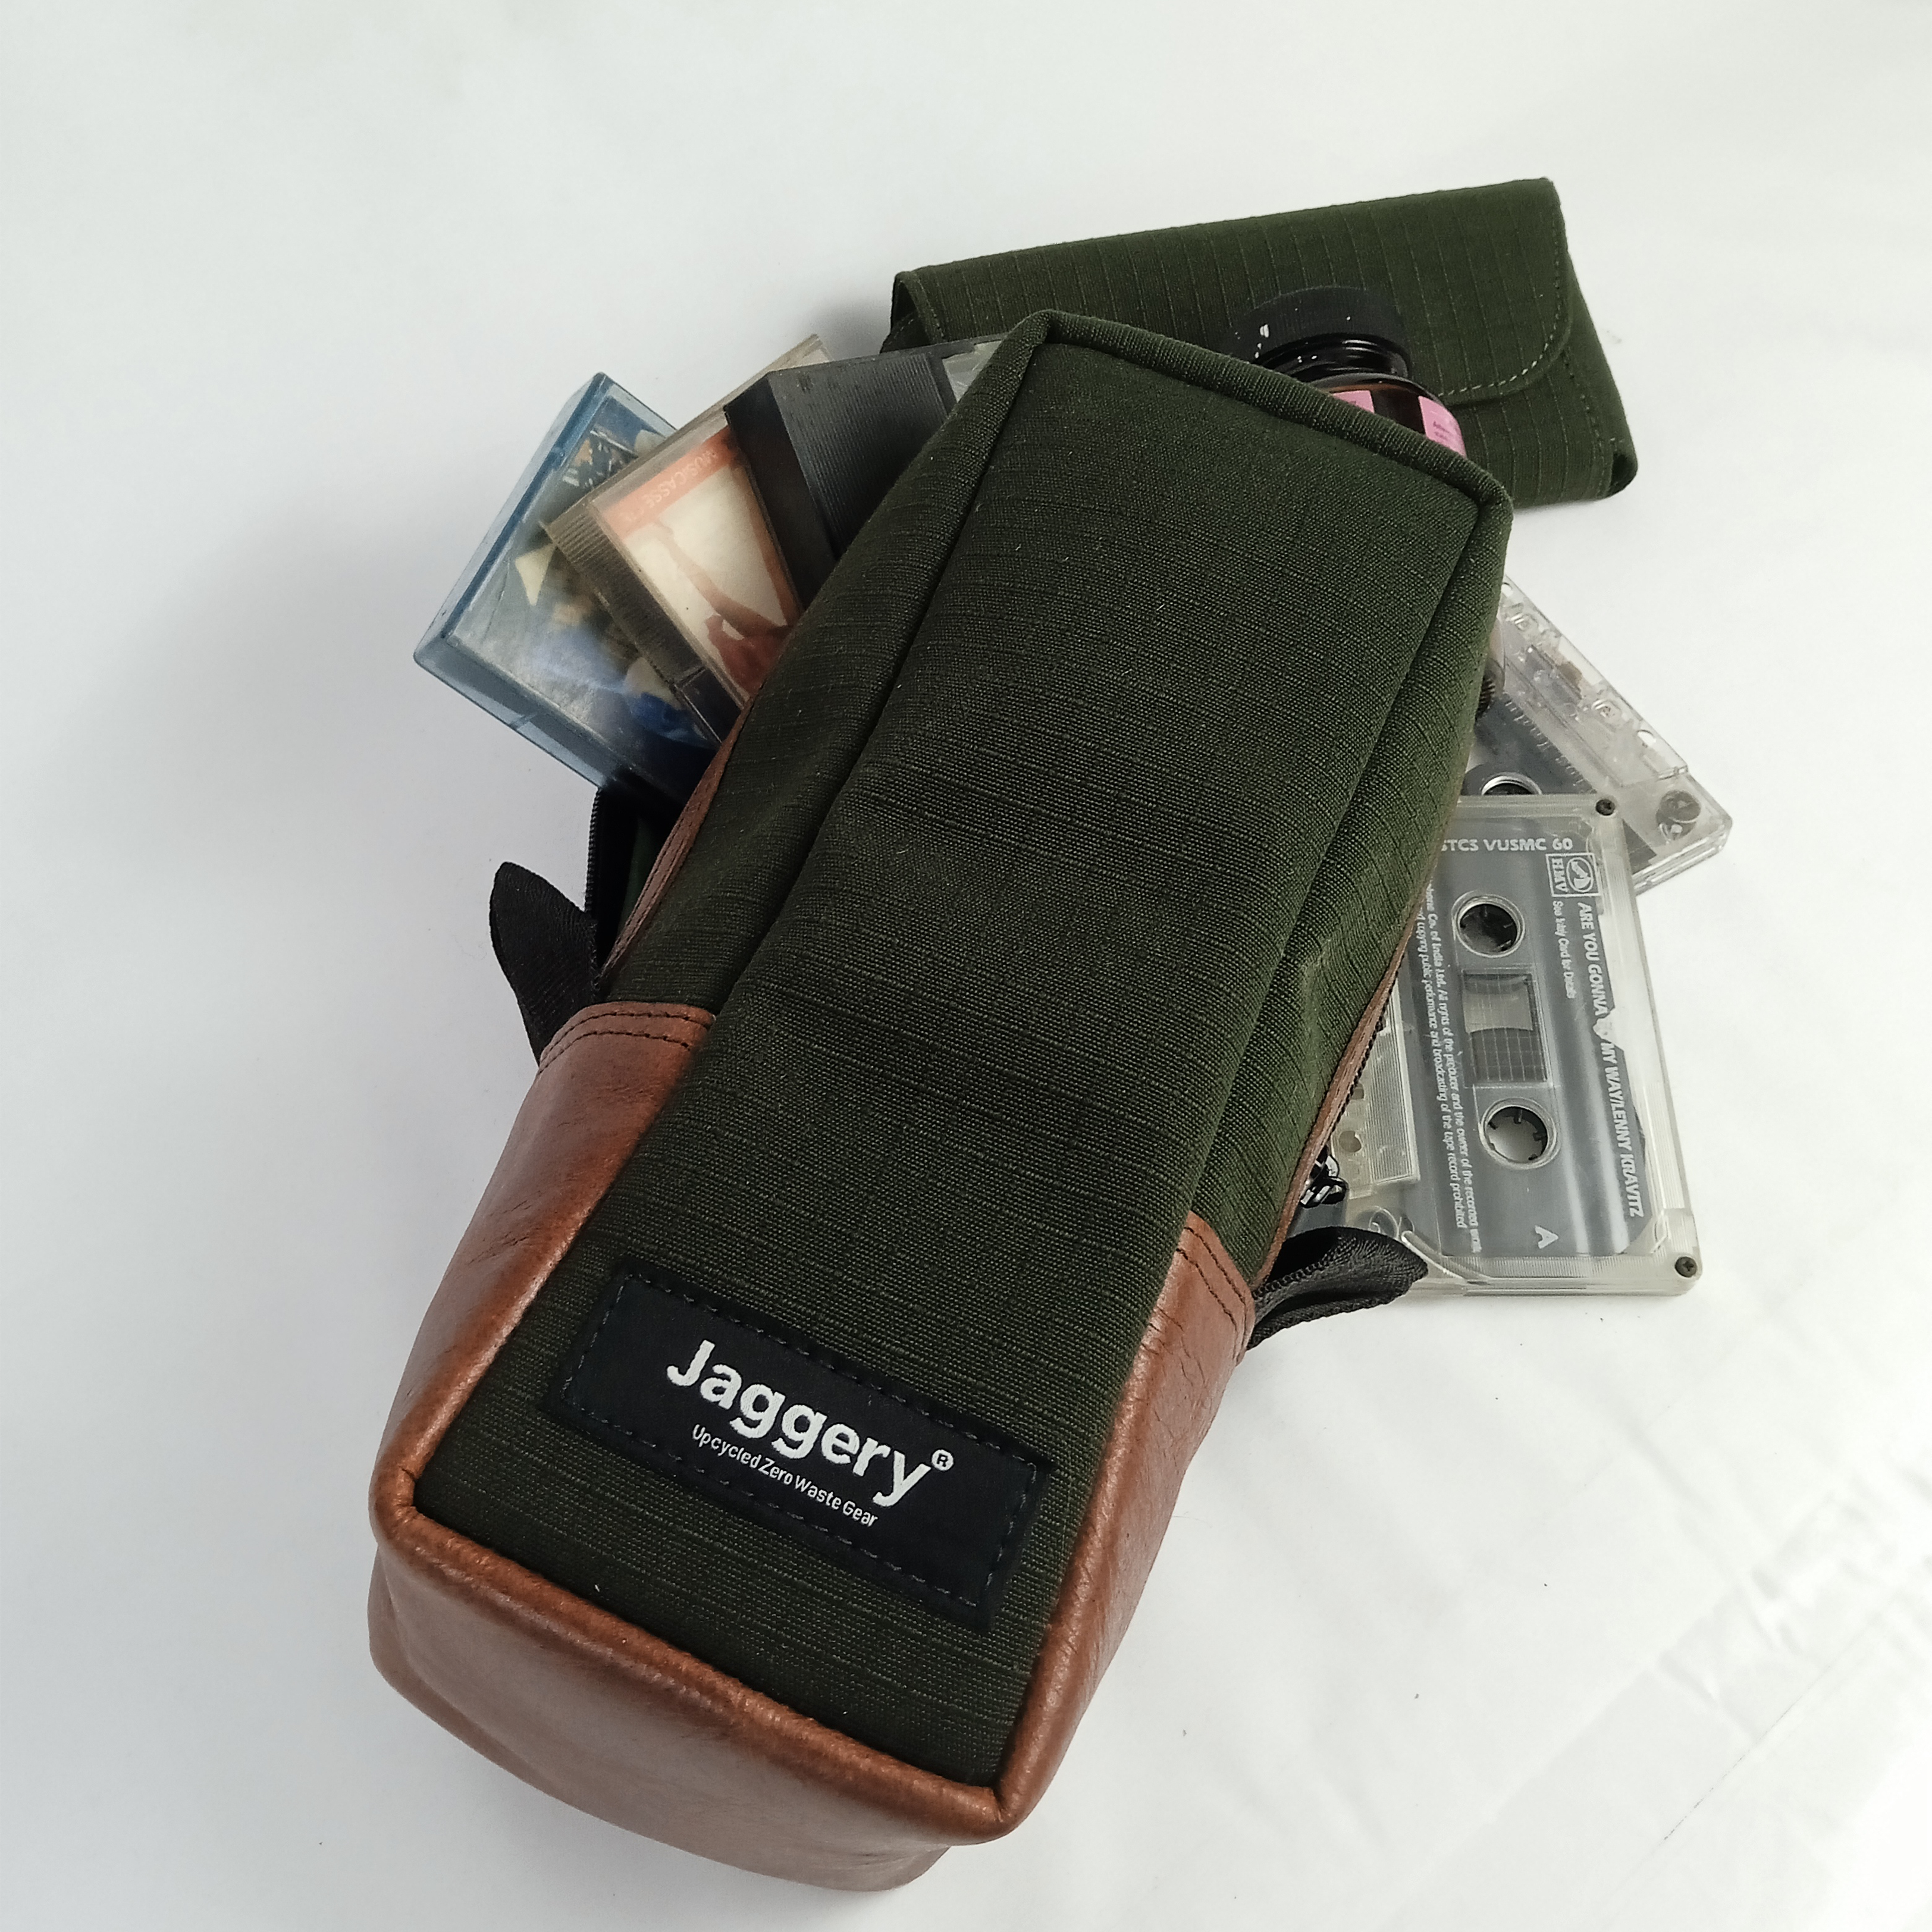 Outback and Beyond Vertical Dopp Kit in Olive Green & Brown Salvaged Nubuck